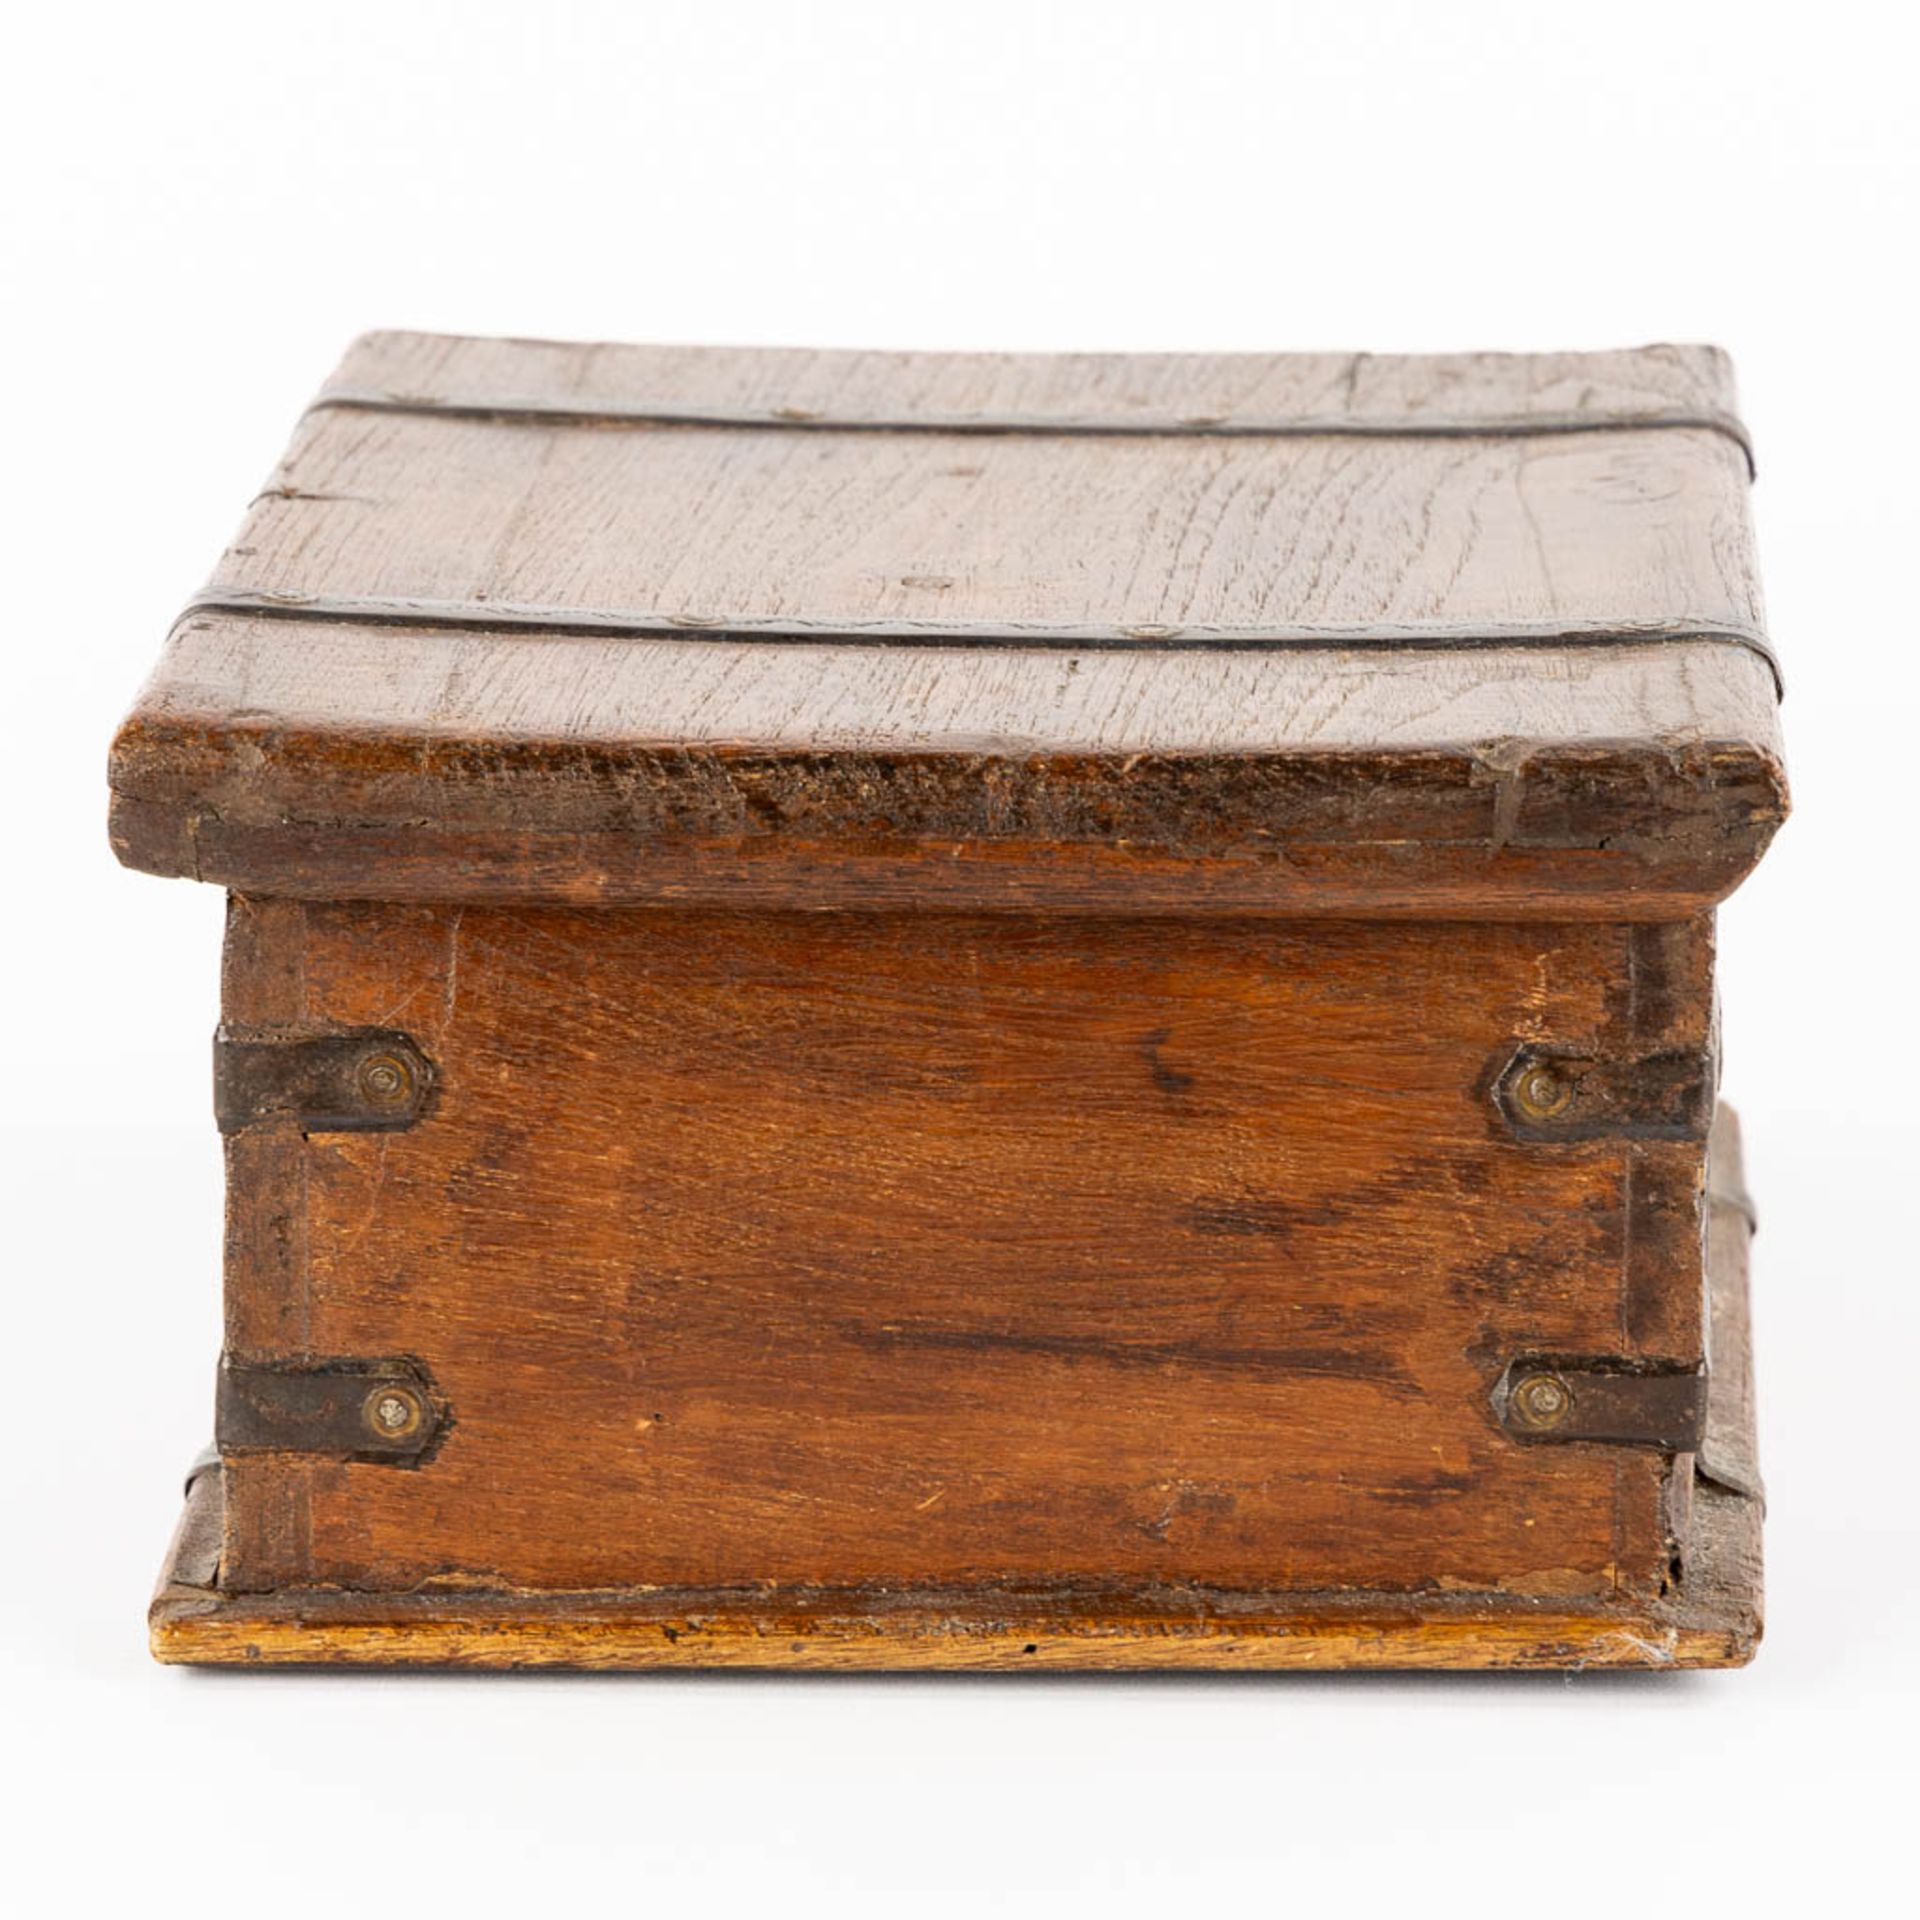 An antique money box or storage chest, oak and wrought iron, 19th C. (L:23 x W:31 x H:13 cm) - Image 4 of 13